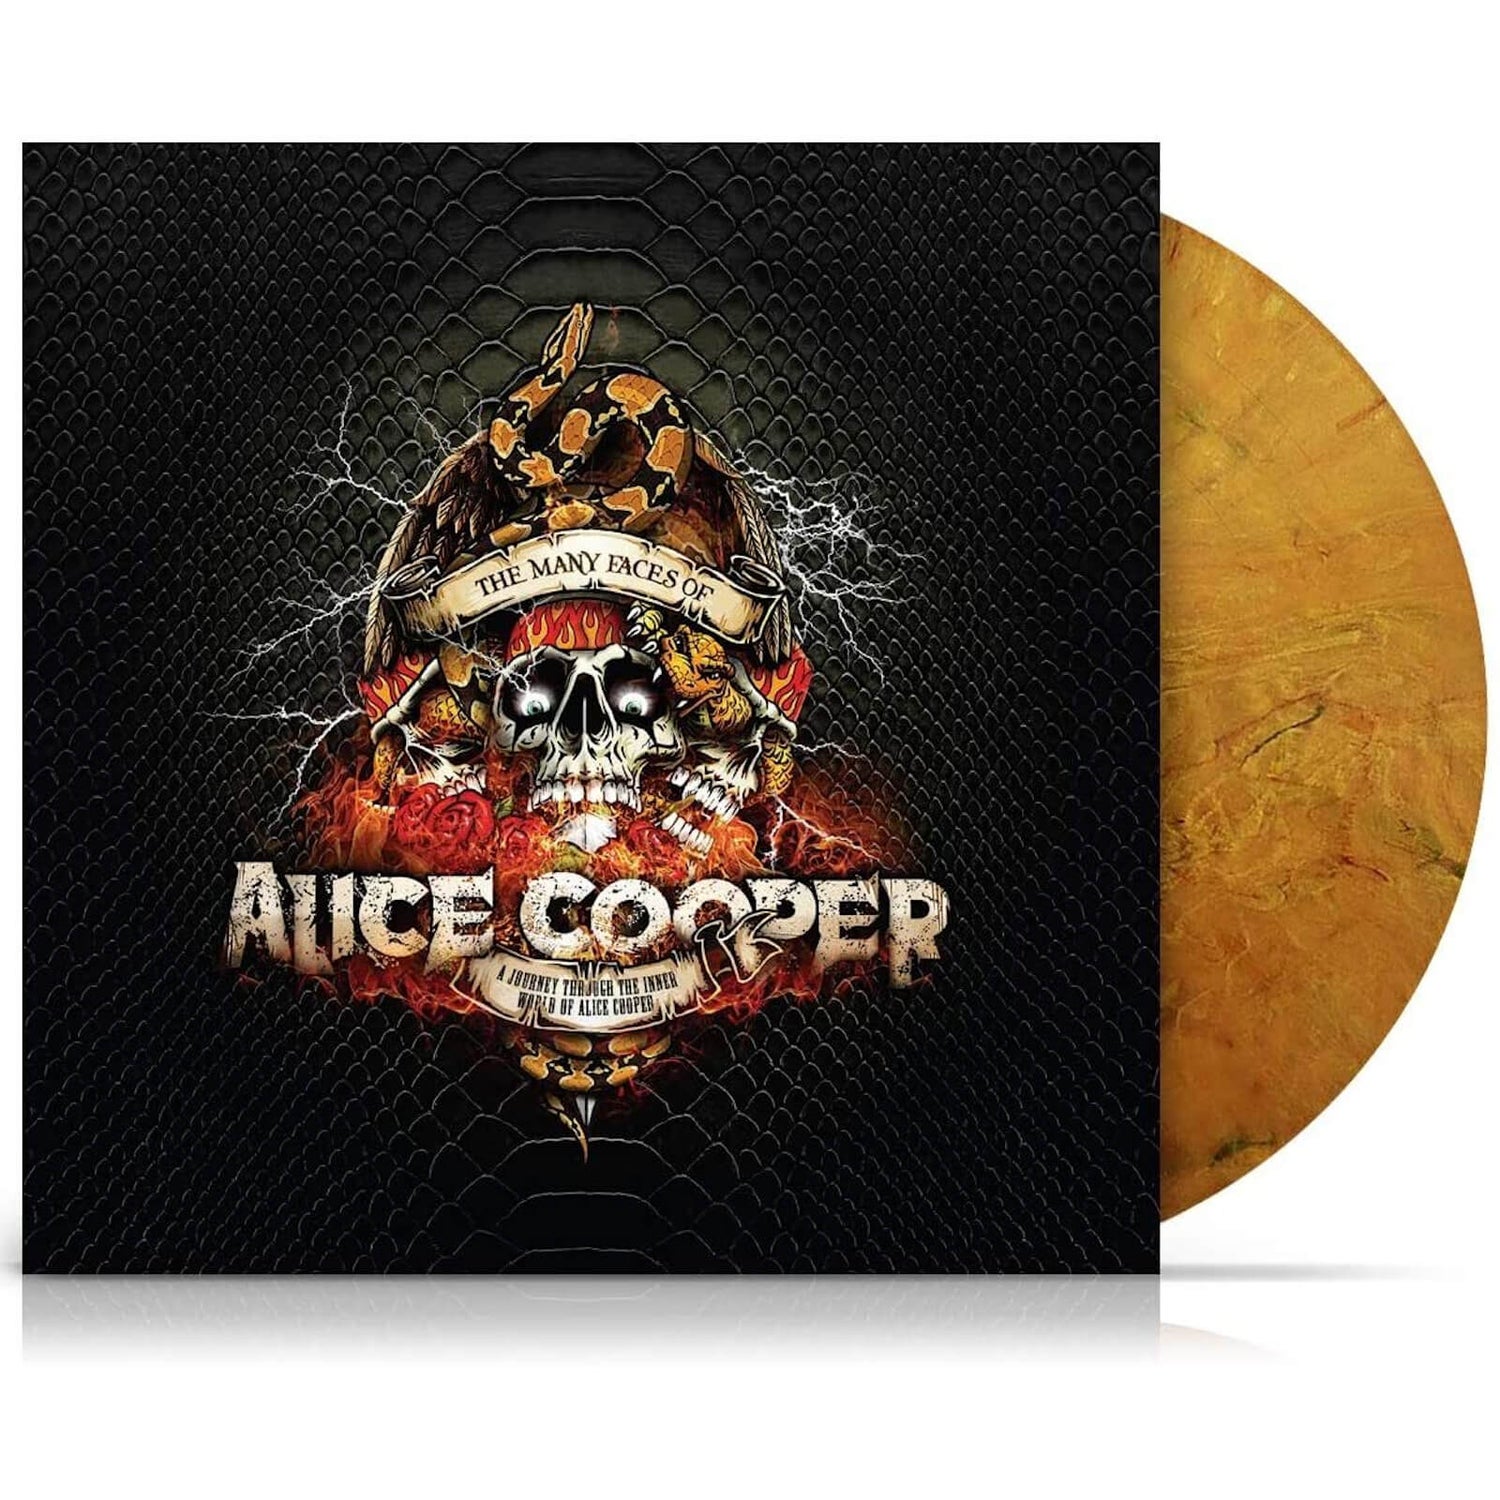 The Many Faces Of Alice Cooper (Vinyle marbré opaque) 2LP